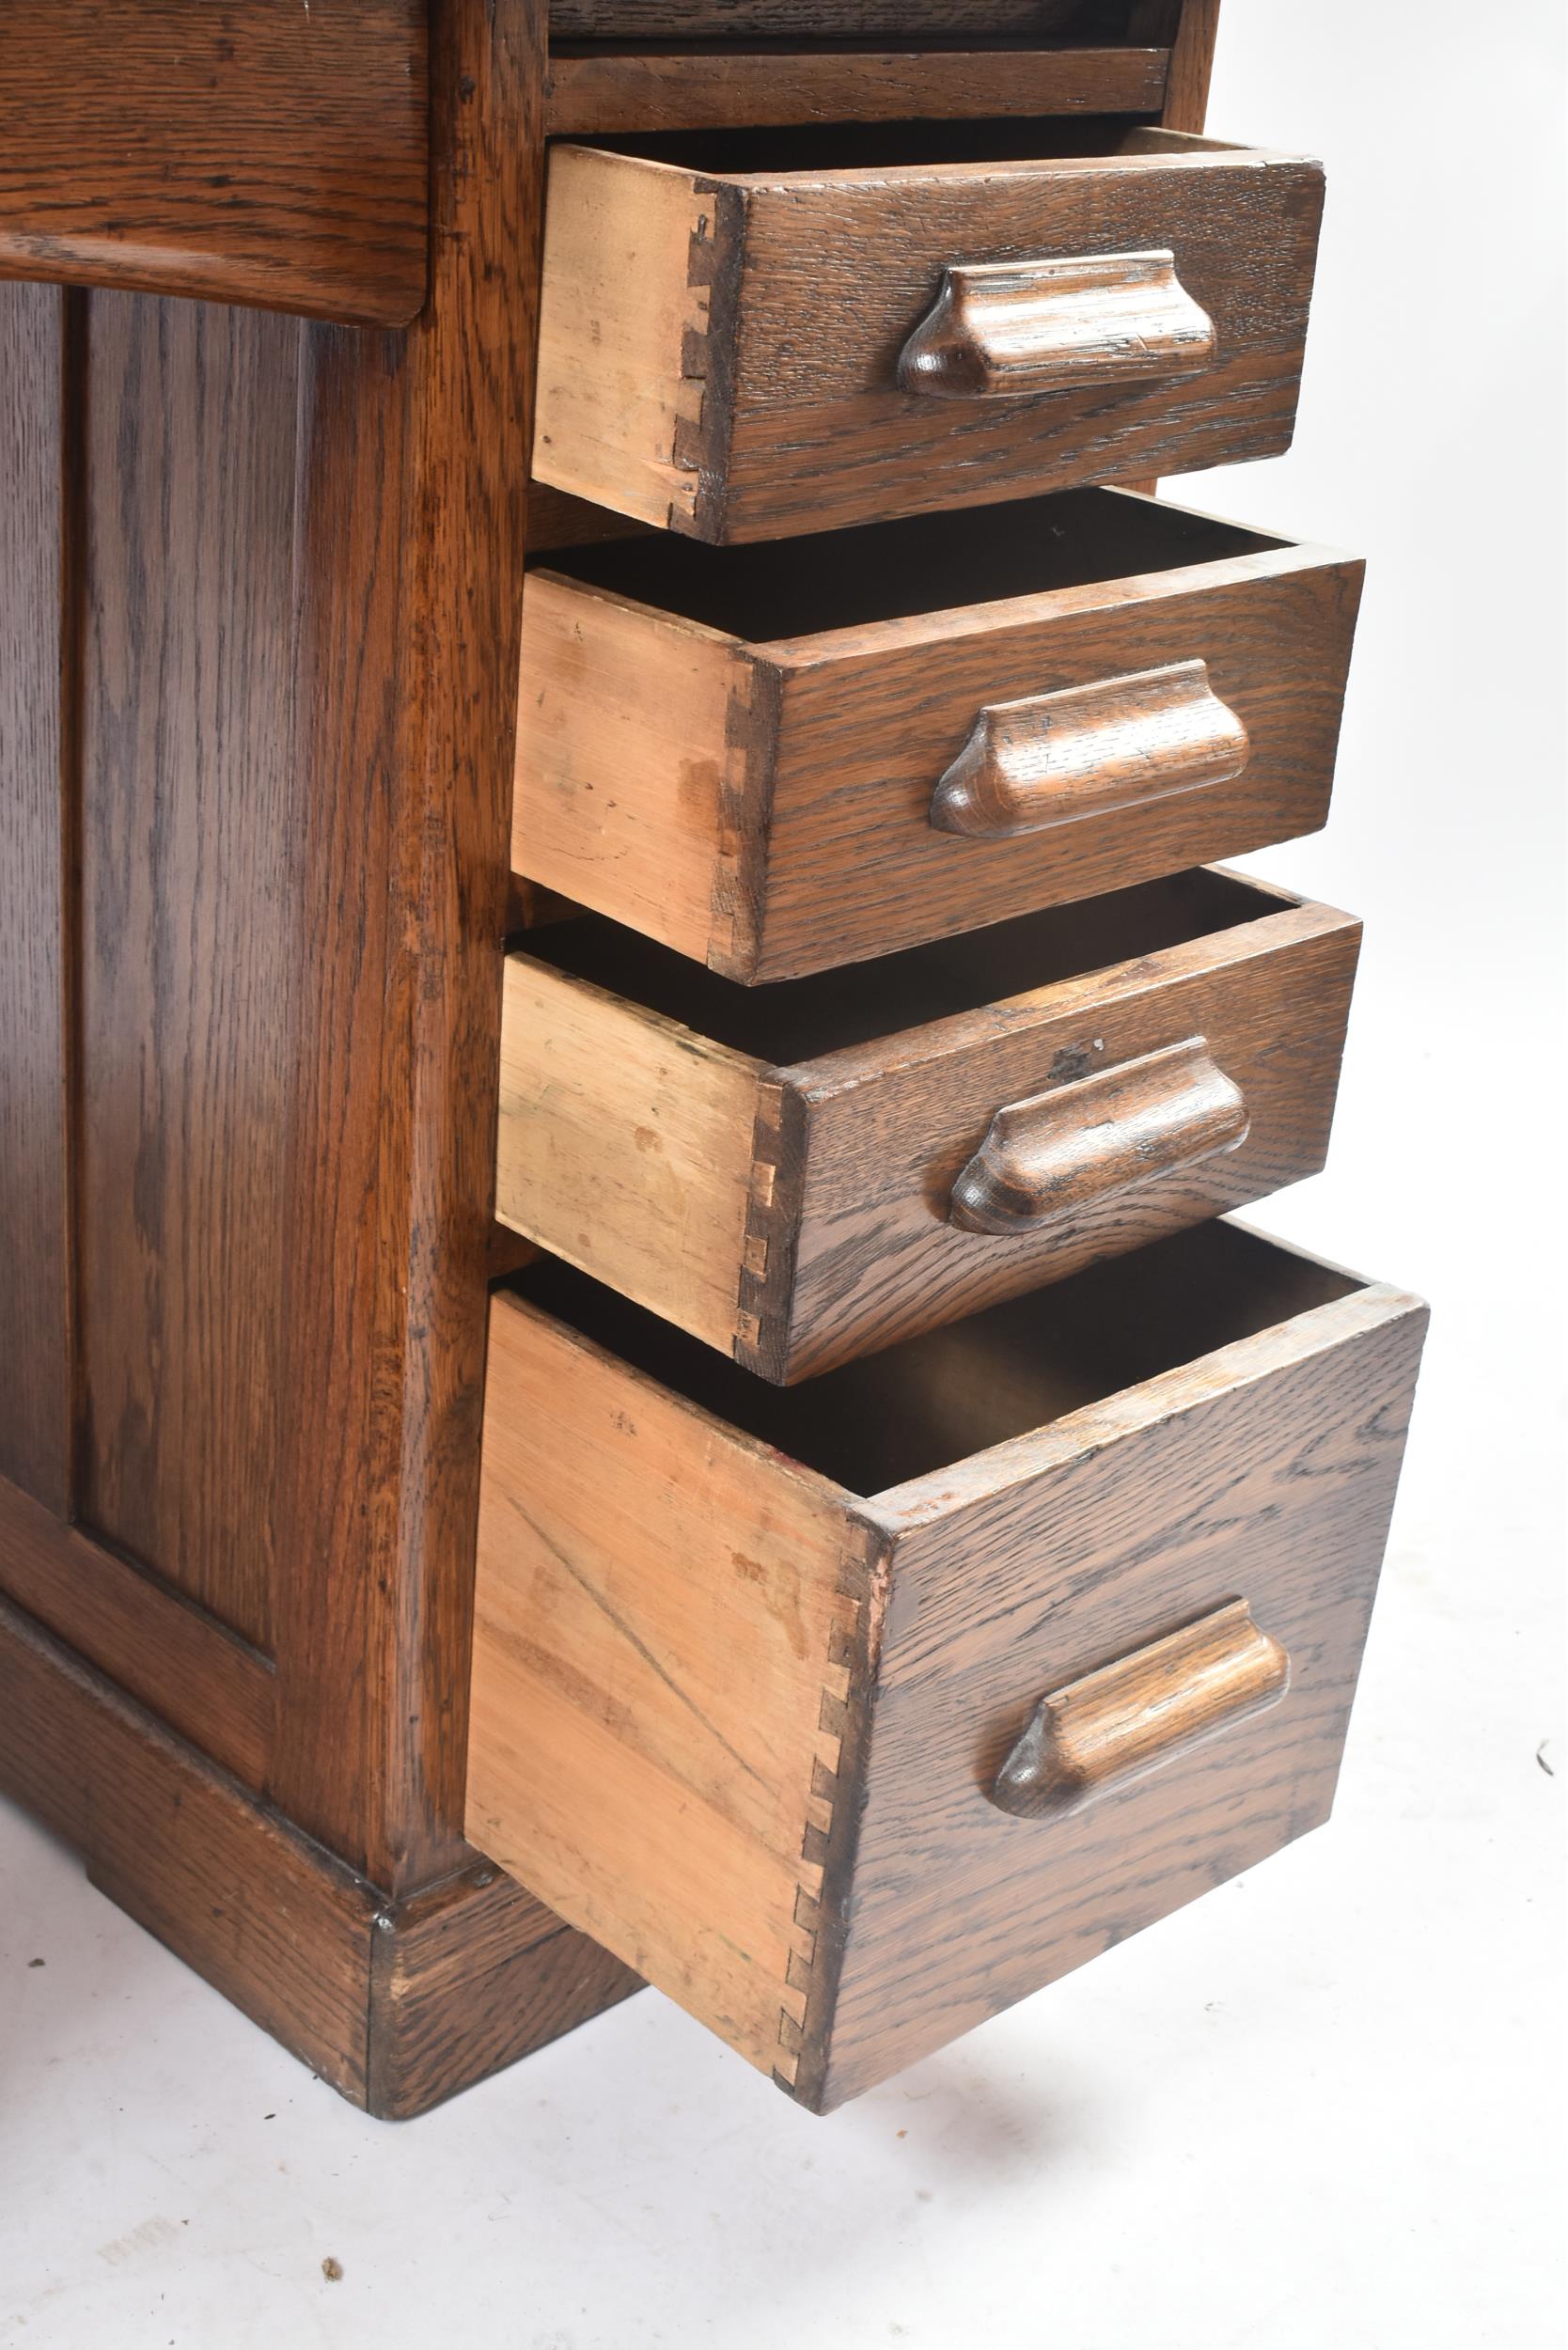 EARLY 20TH CENTURY 1920S OAK HILL'S FURNITURE ROLL TOP DESK - Image 4 of 6